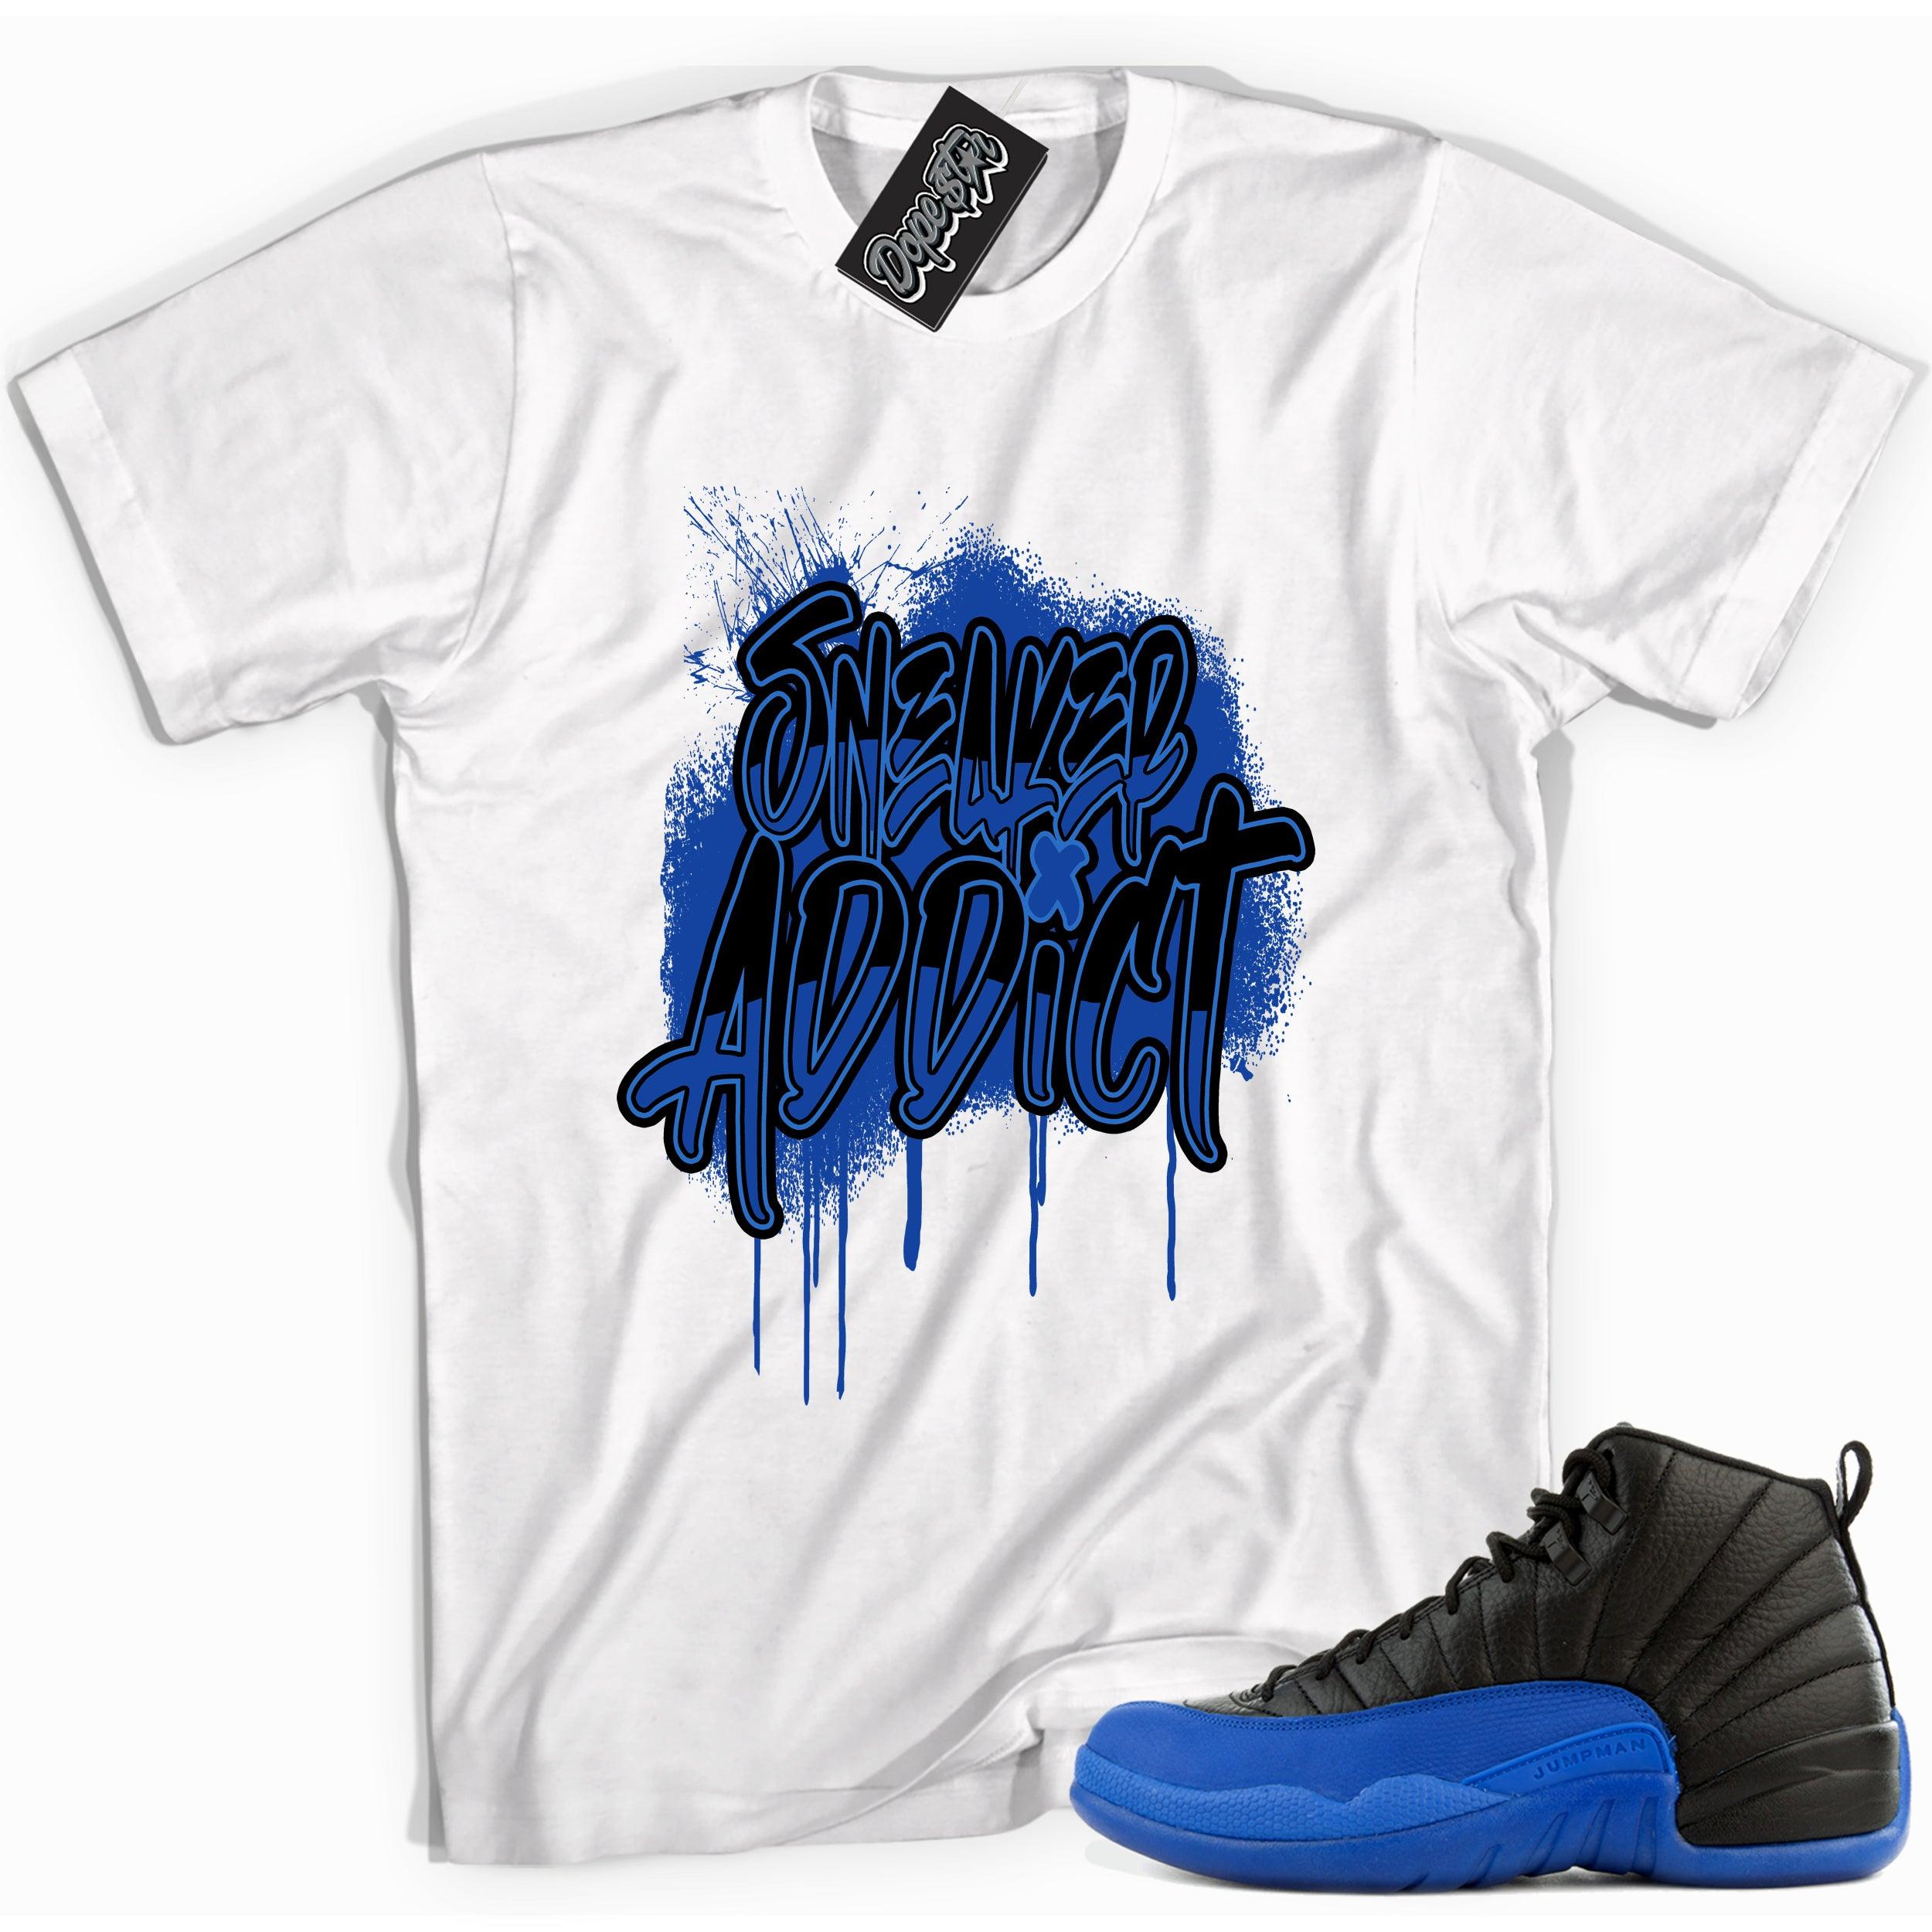 Cool white graphic tee with 'sneaker addict' print, that perfectly matches Air Jordan 12 Retro Black Game Royal sneakers.